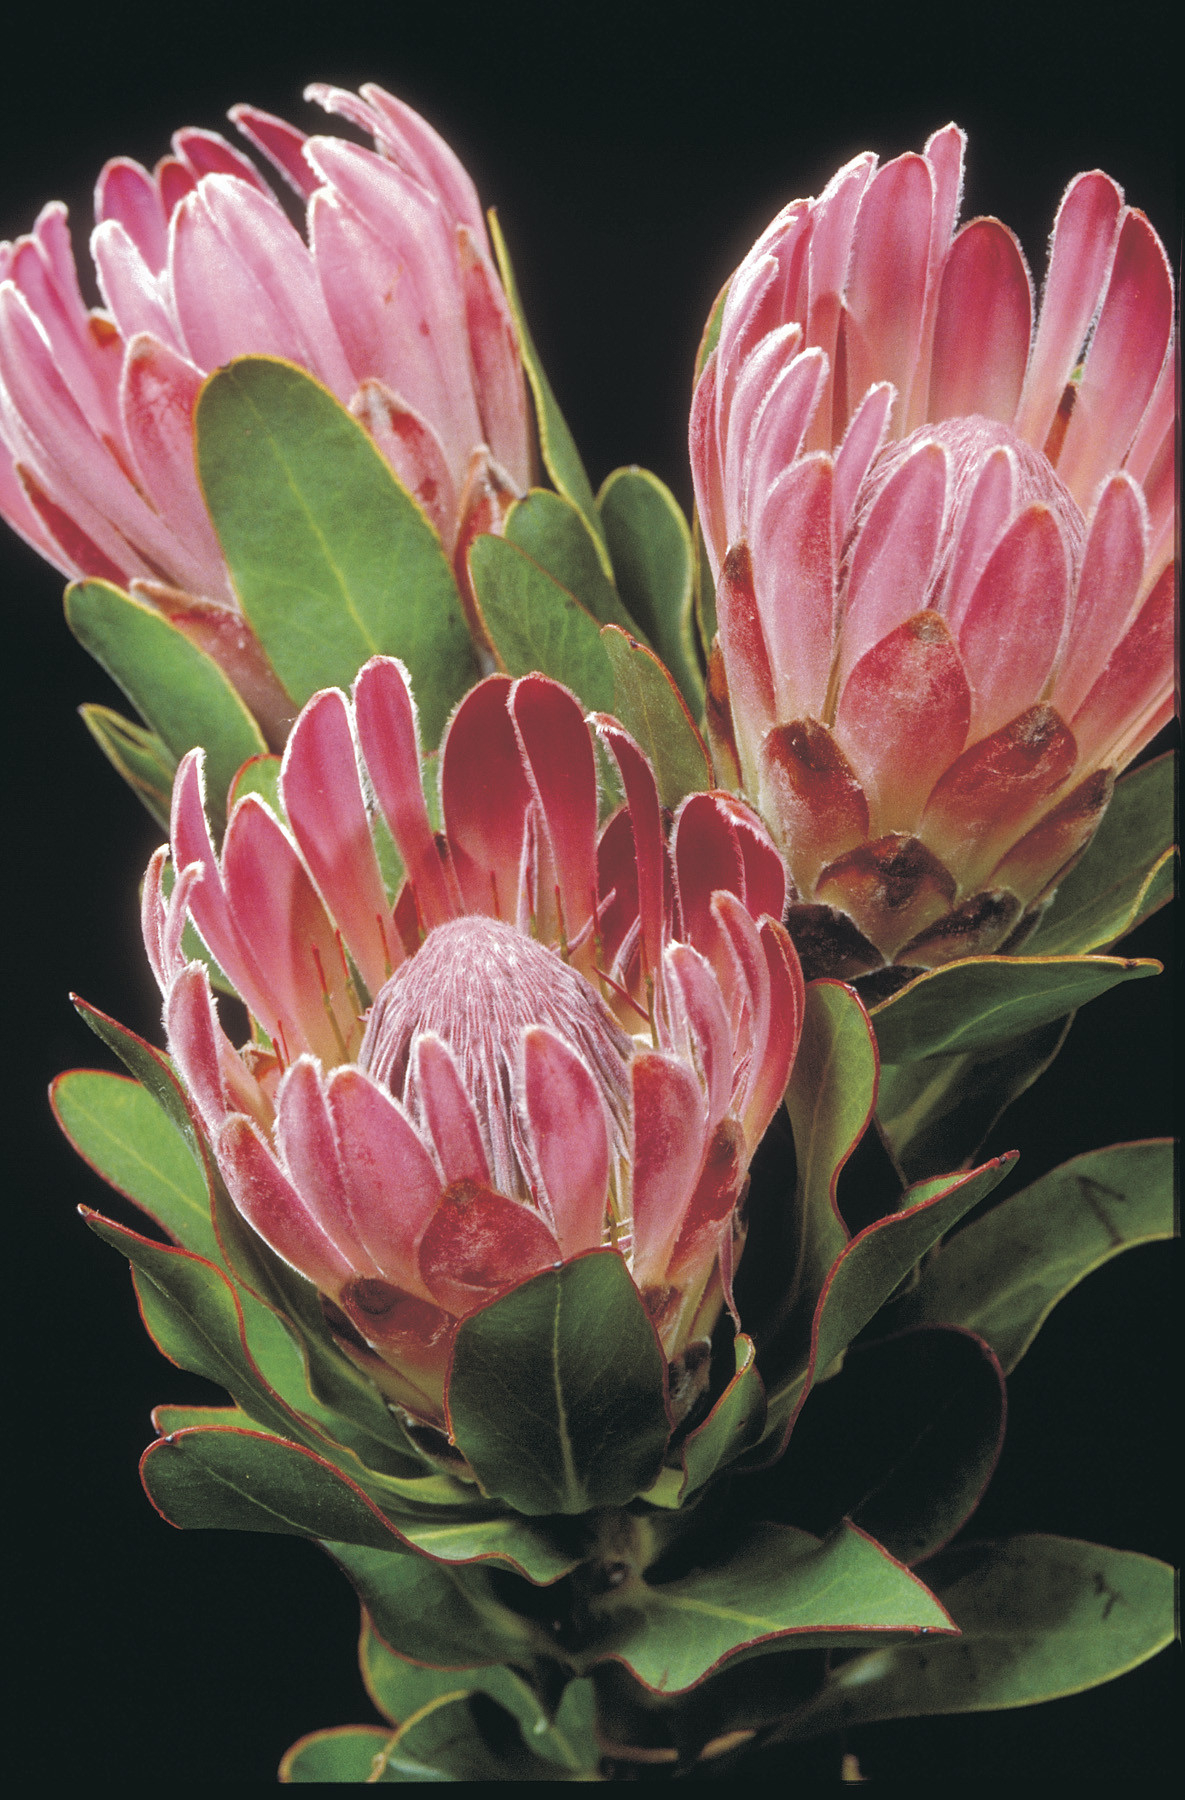 Growing Proteas | Agriculture And Food